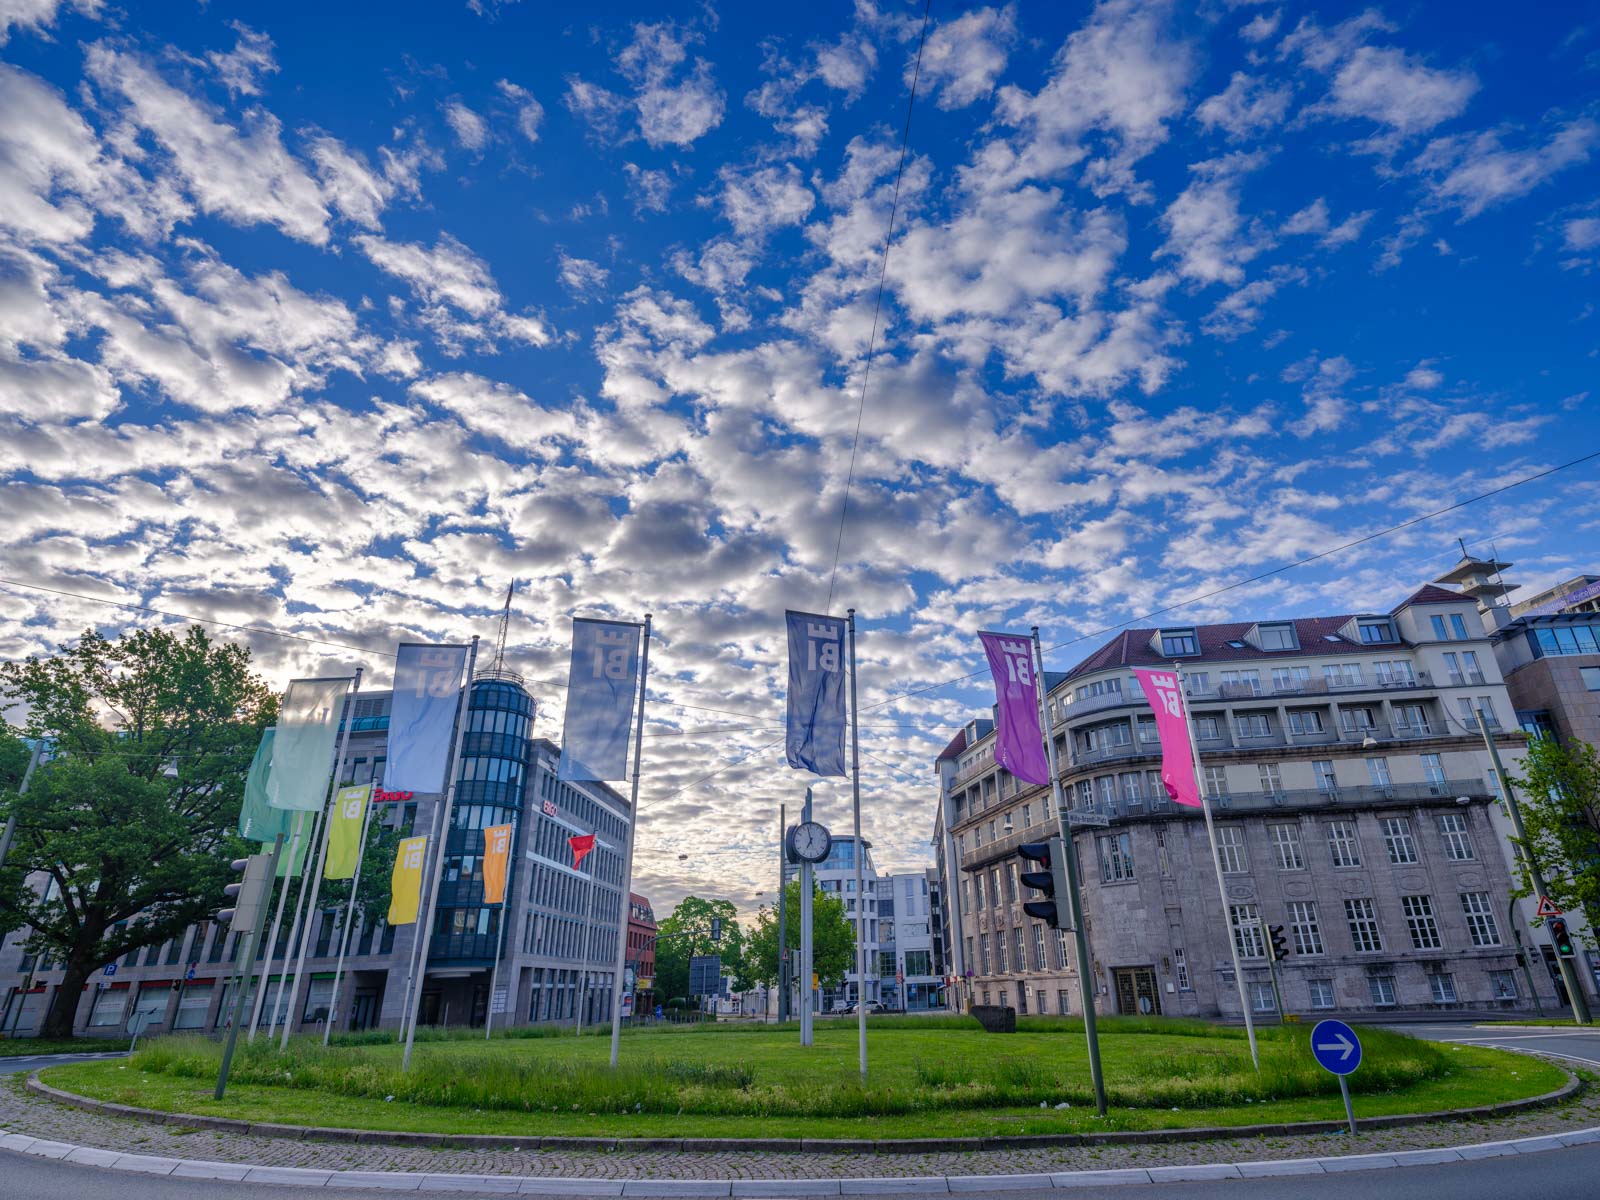 Clouds over 'Willy-Brandt-Platz' in May 2021 (Bielefeld, Germany).